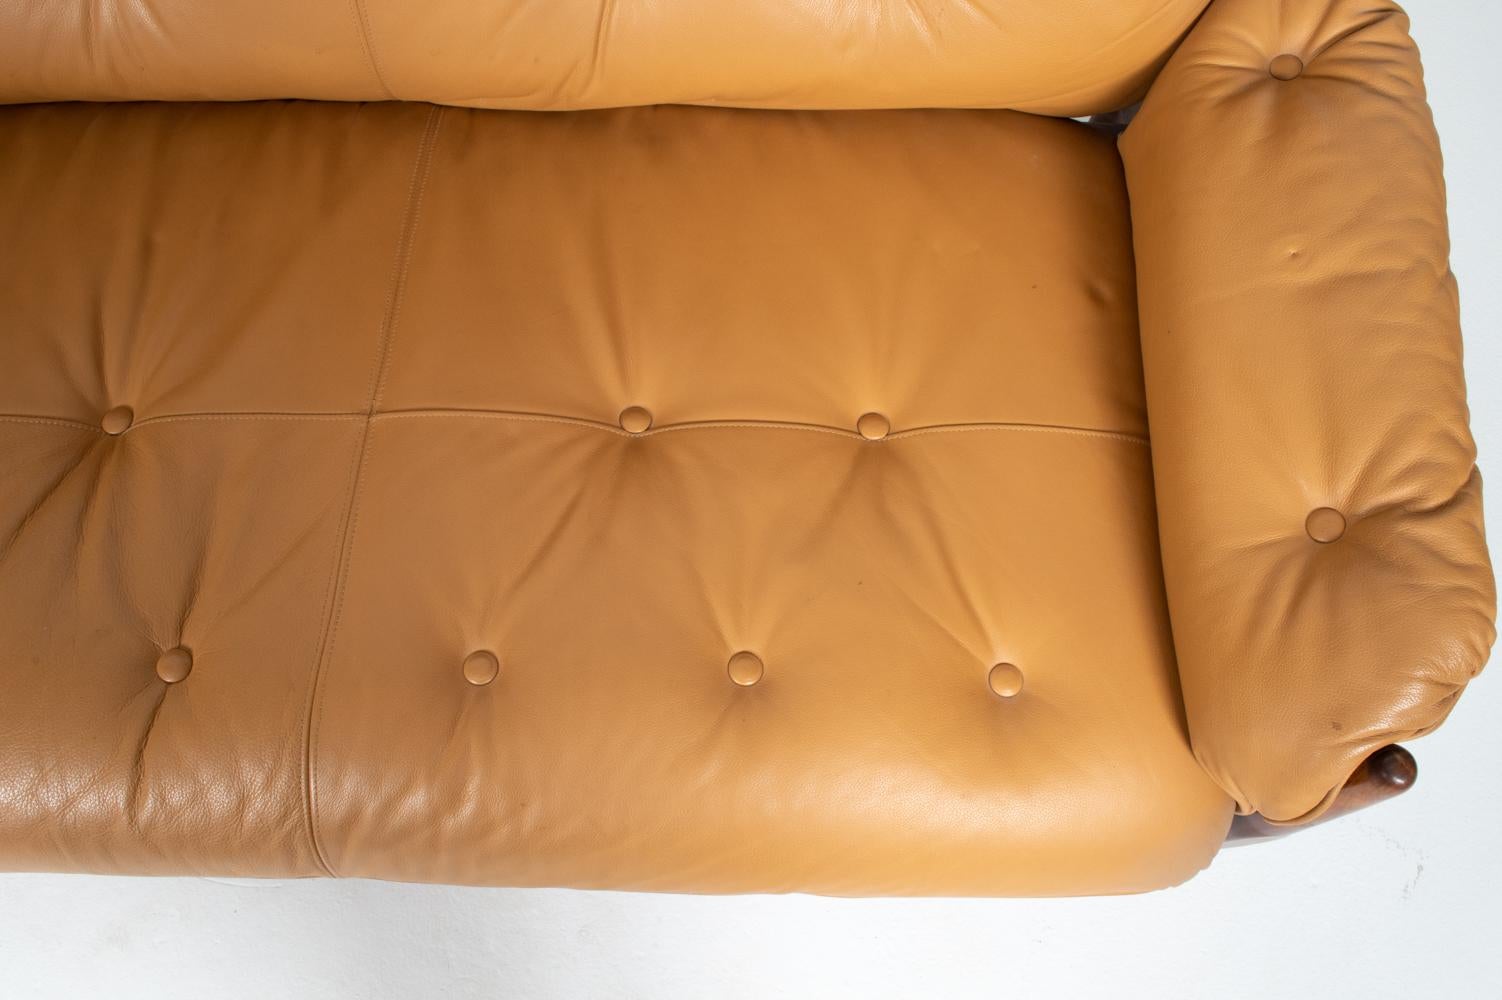 20th Century Brazilian Modernist Rosewood & Leather Sofa, circa 1970s For Sale